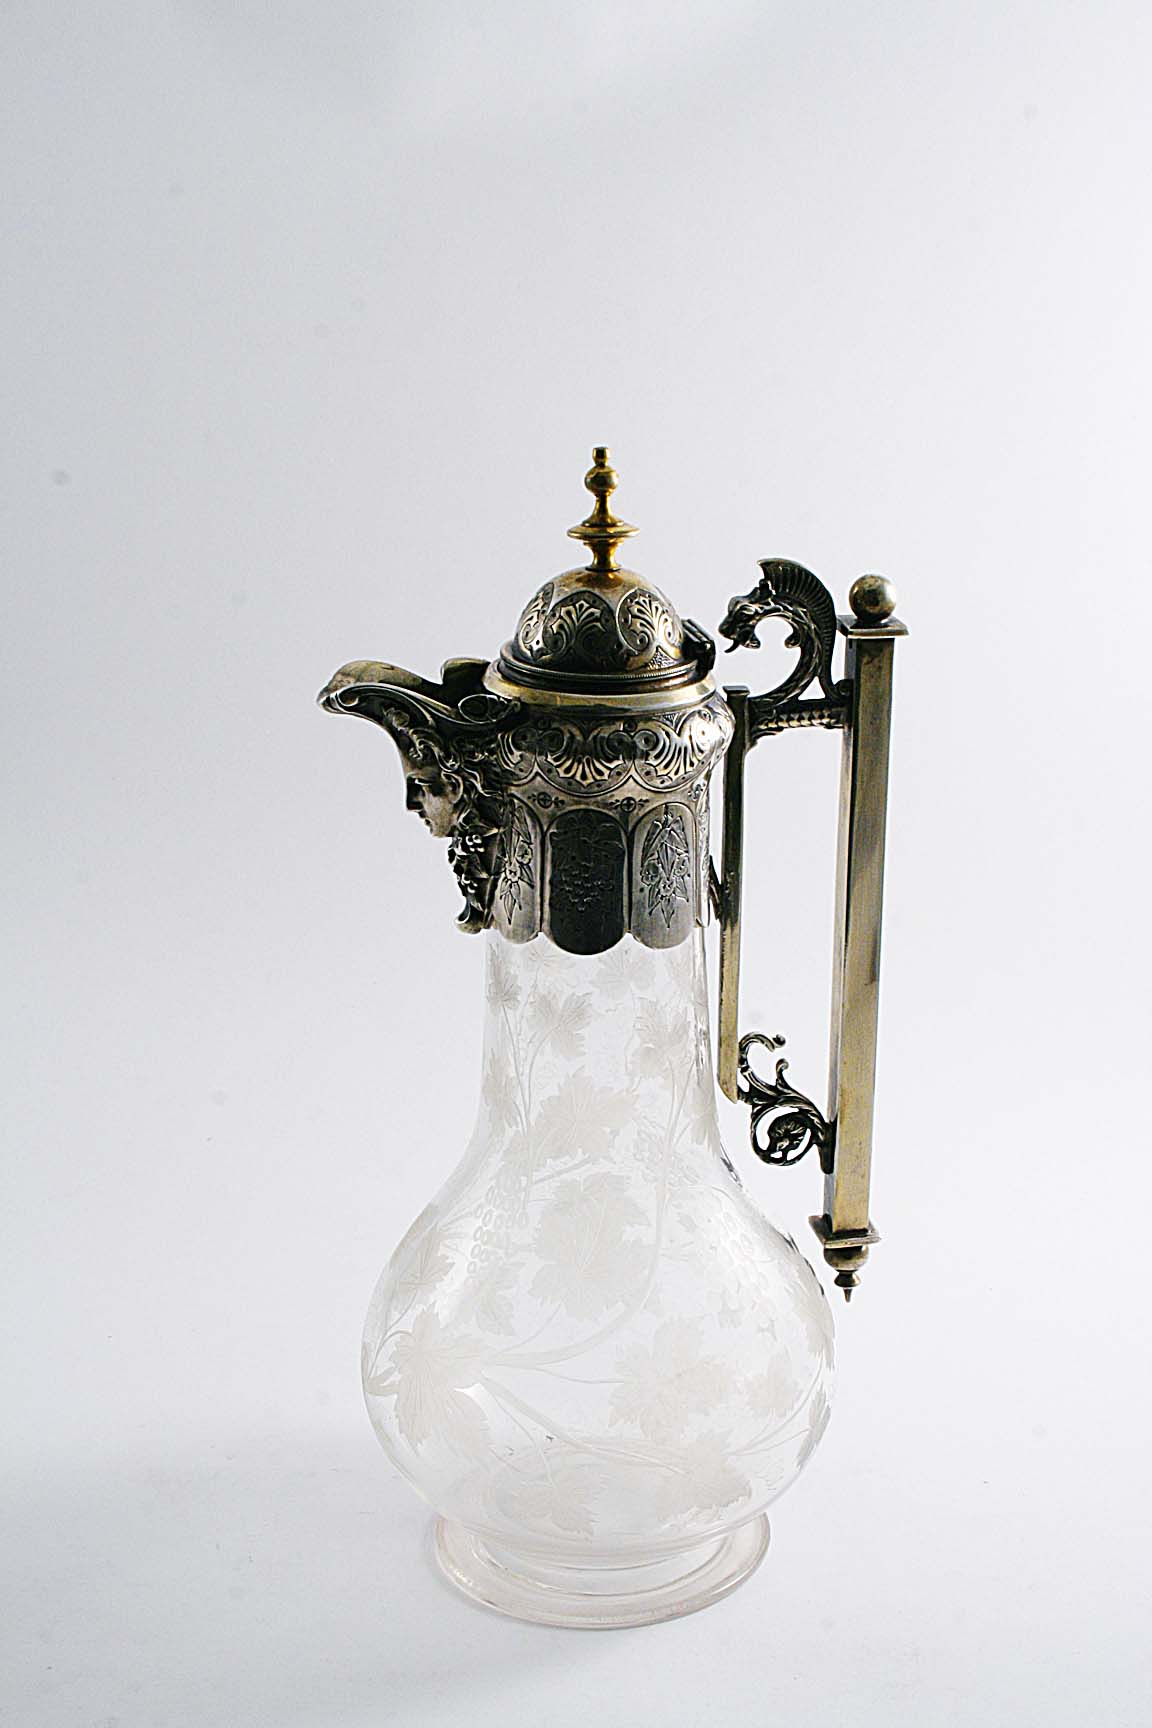 A VICTORIAN PLATED-MOUNTED CLEAR GLASS CLARET JUG with a baluster body, cut with a design of